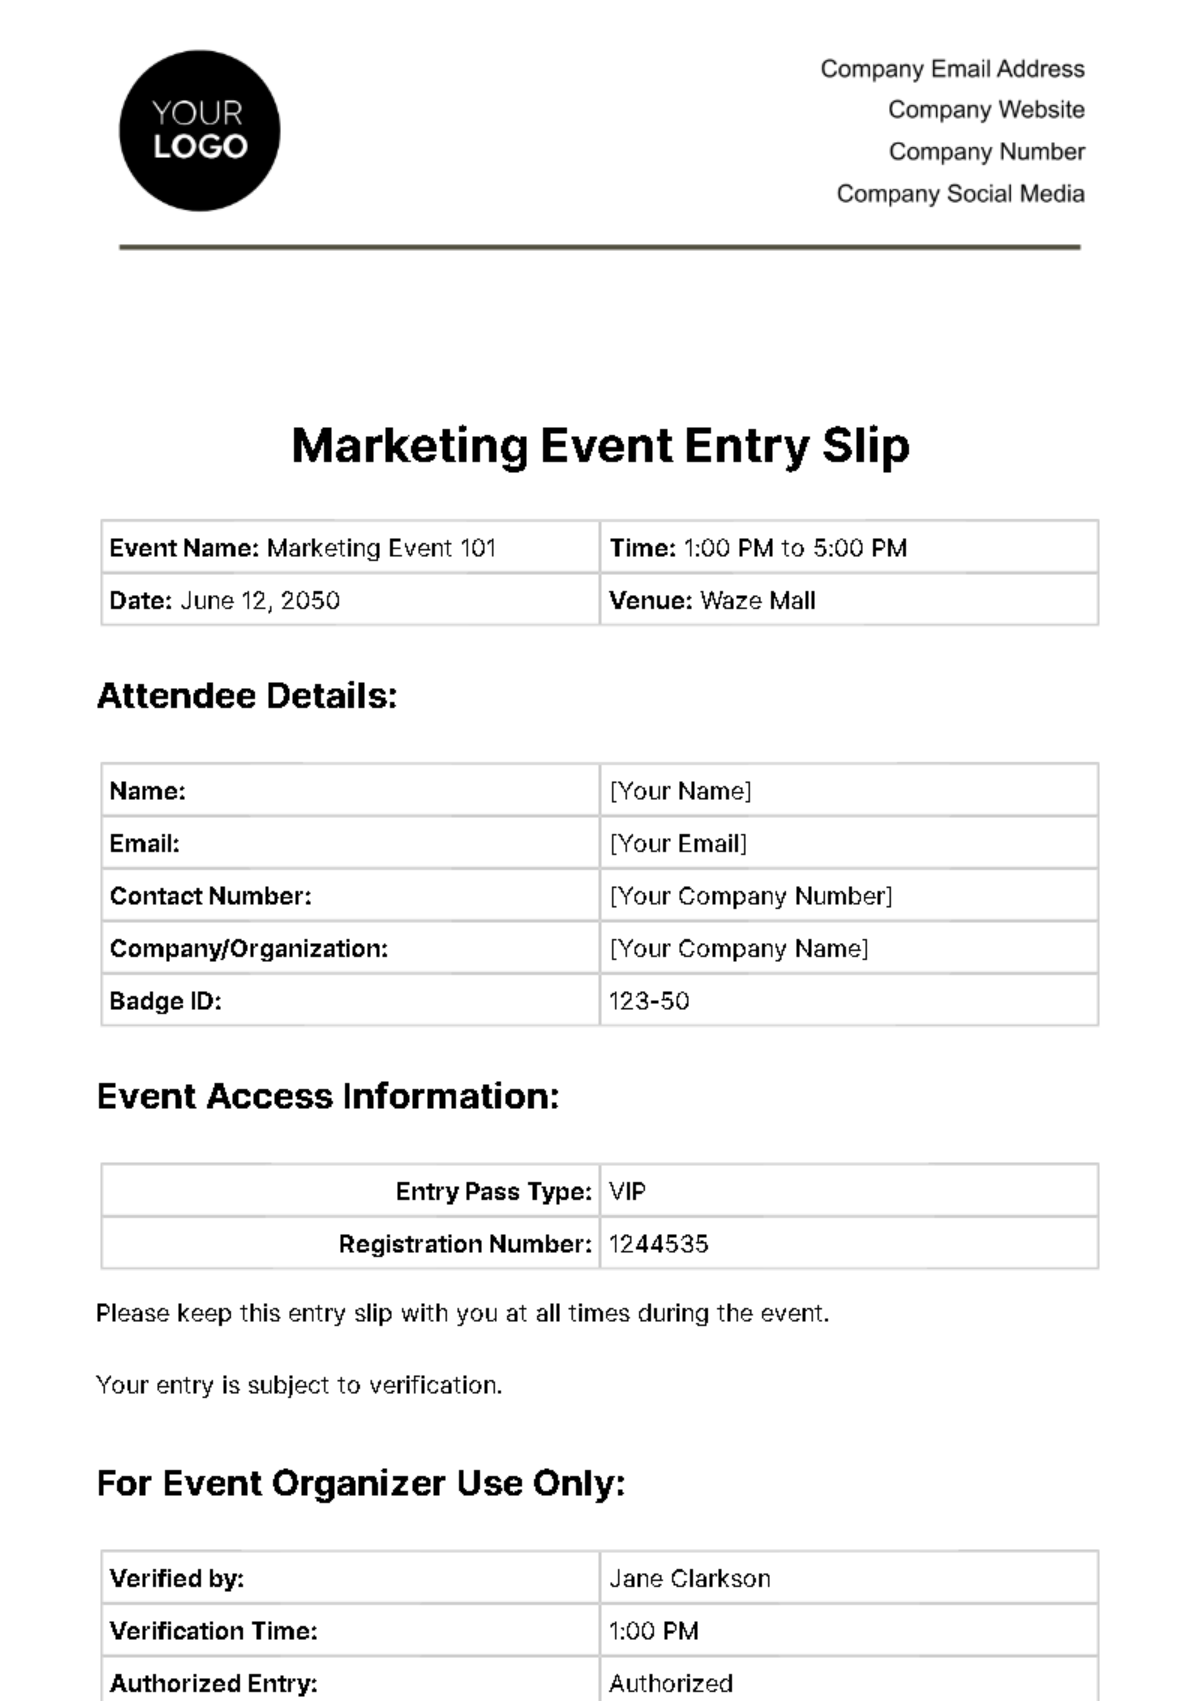 Free Marketing Event Entry Slip Template